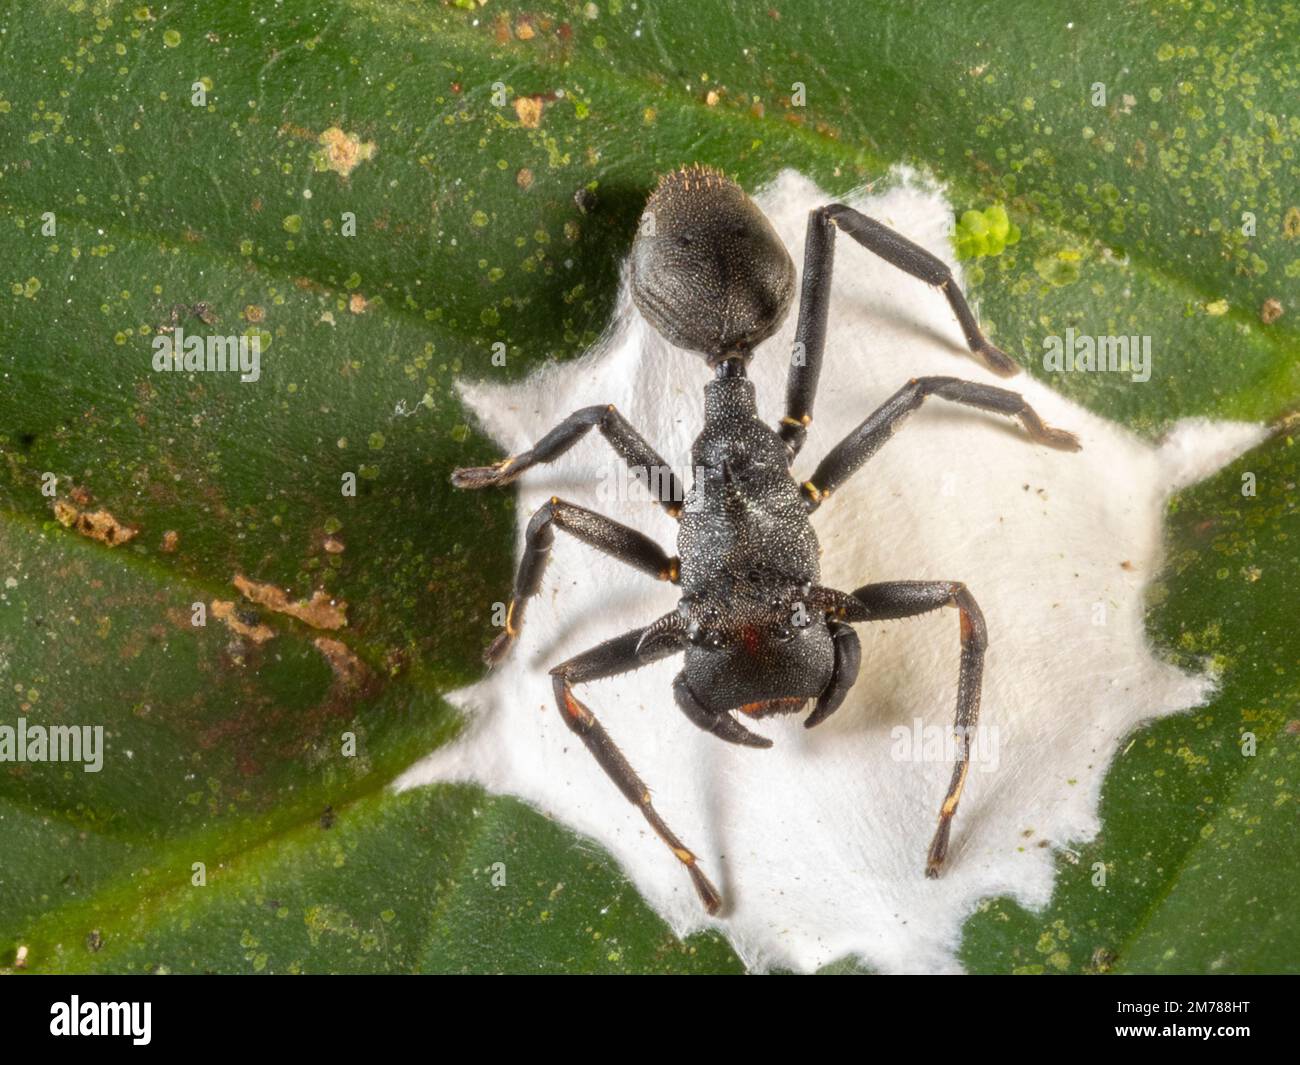 Ant mimic spider (Apantochilus sp.) guarding its eggs in t,he rainforest, Orellana province, Ecuador. Mimic of a turtle ant, Cephalotes sp. Stock Photo